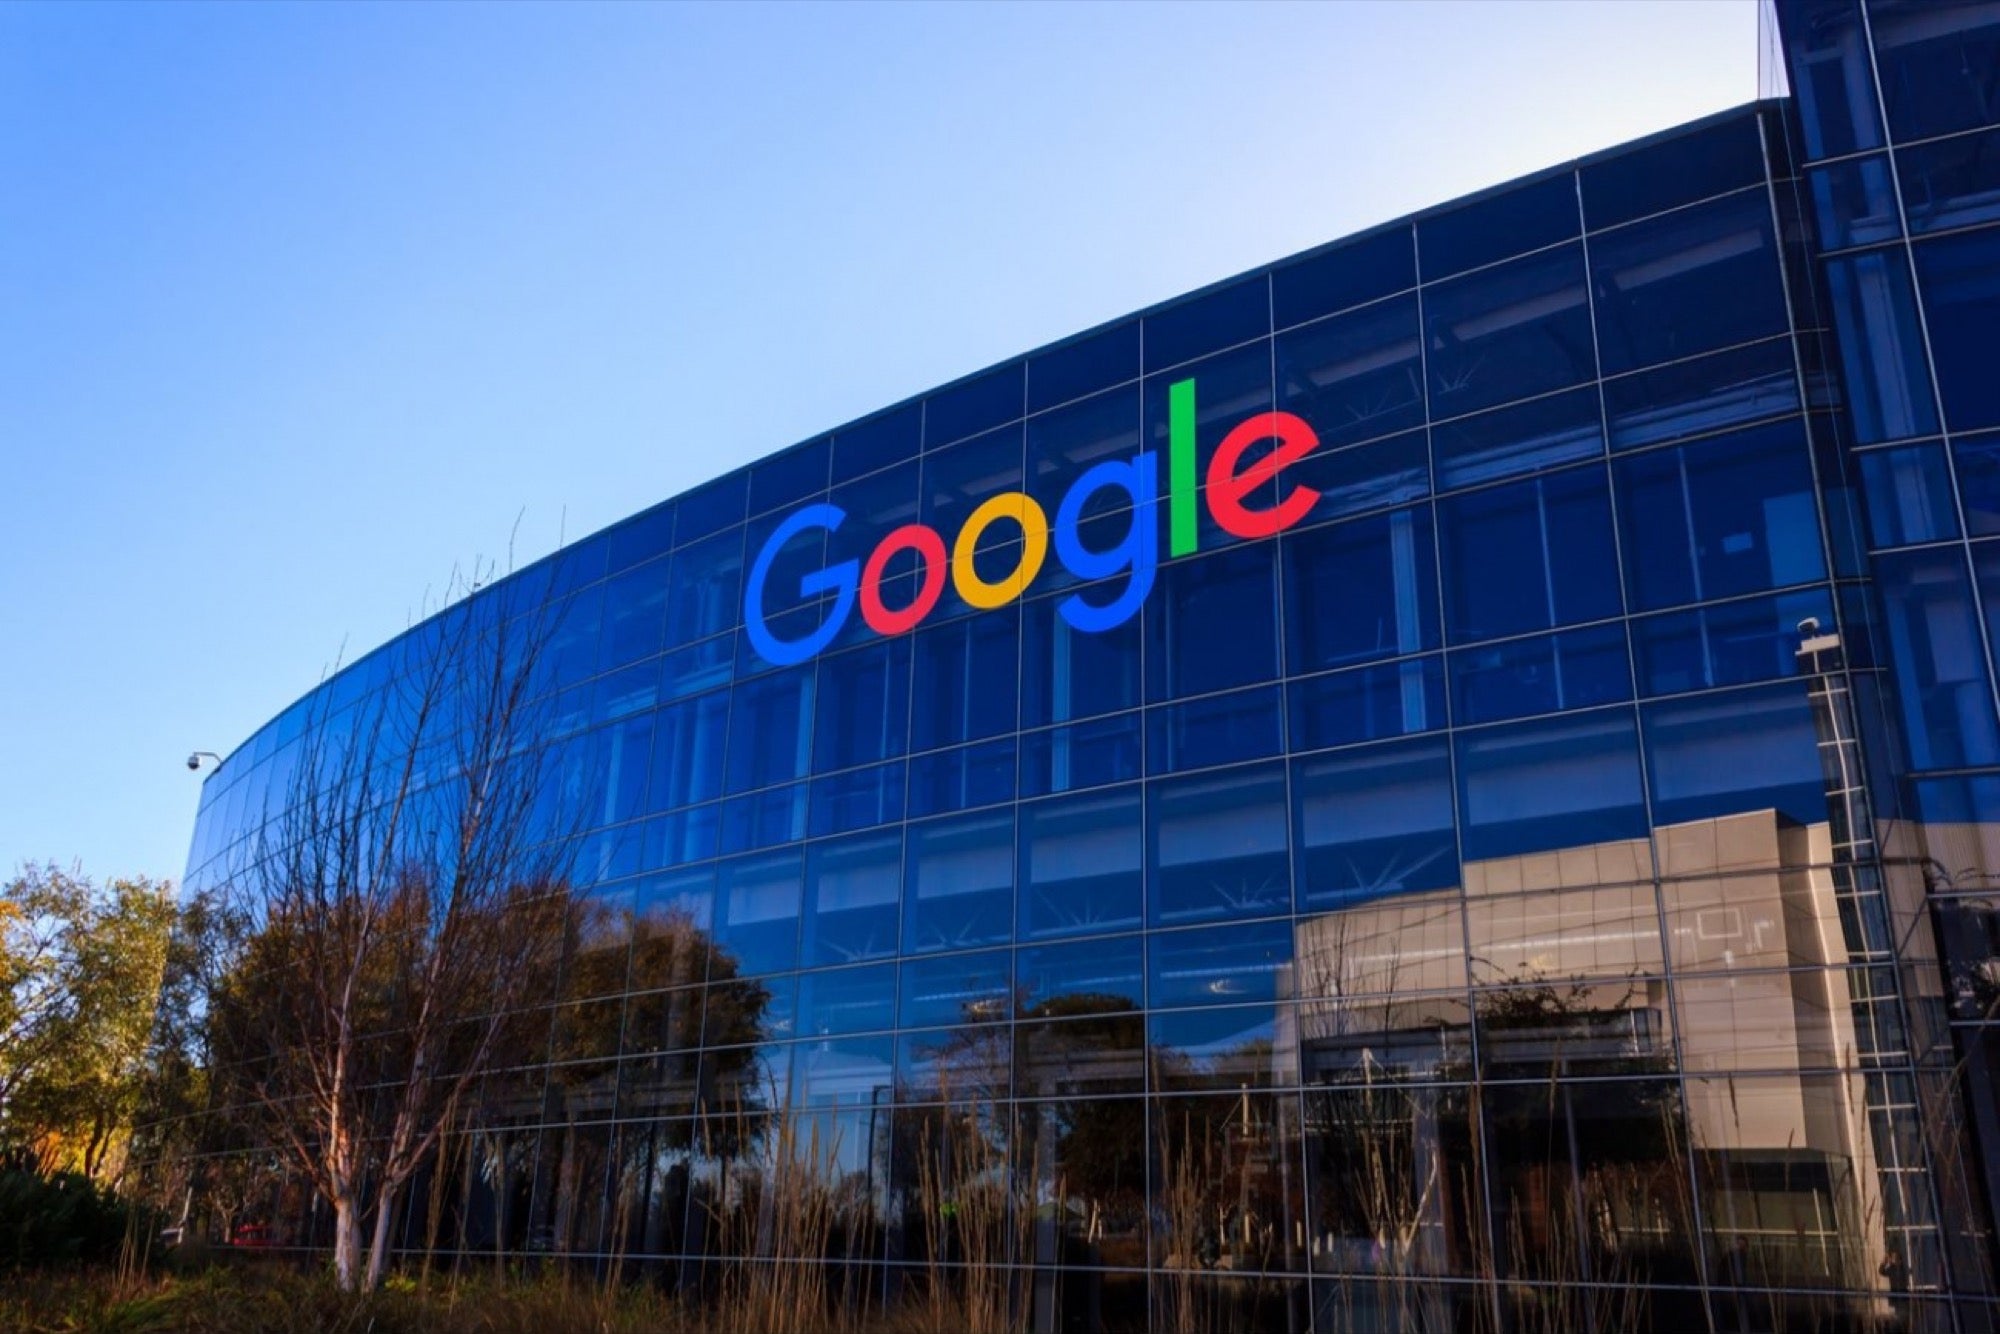 Google assures fair implementation of inapp payments policy in India